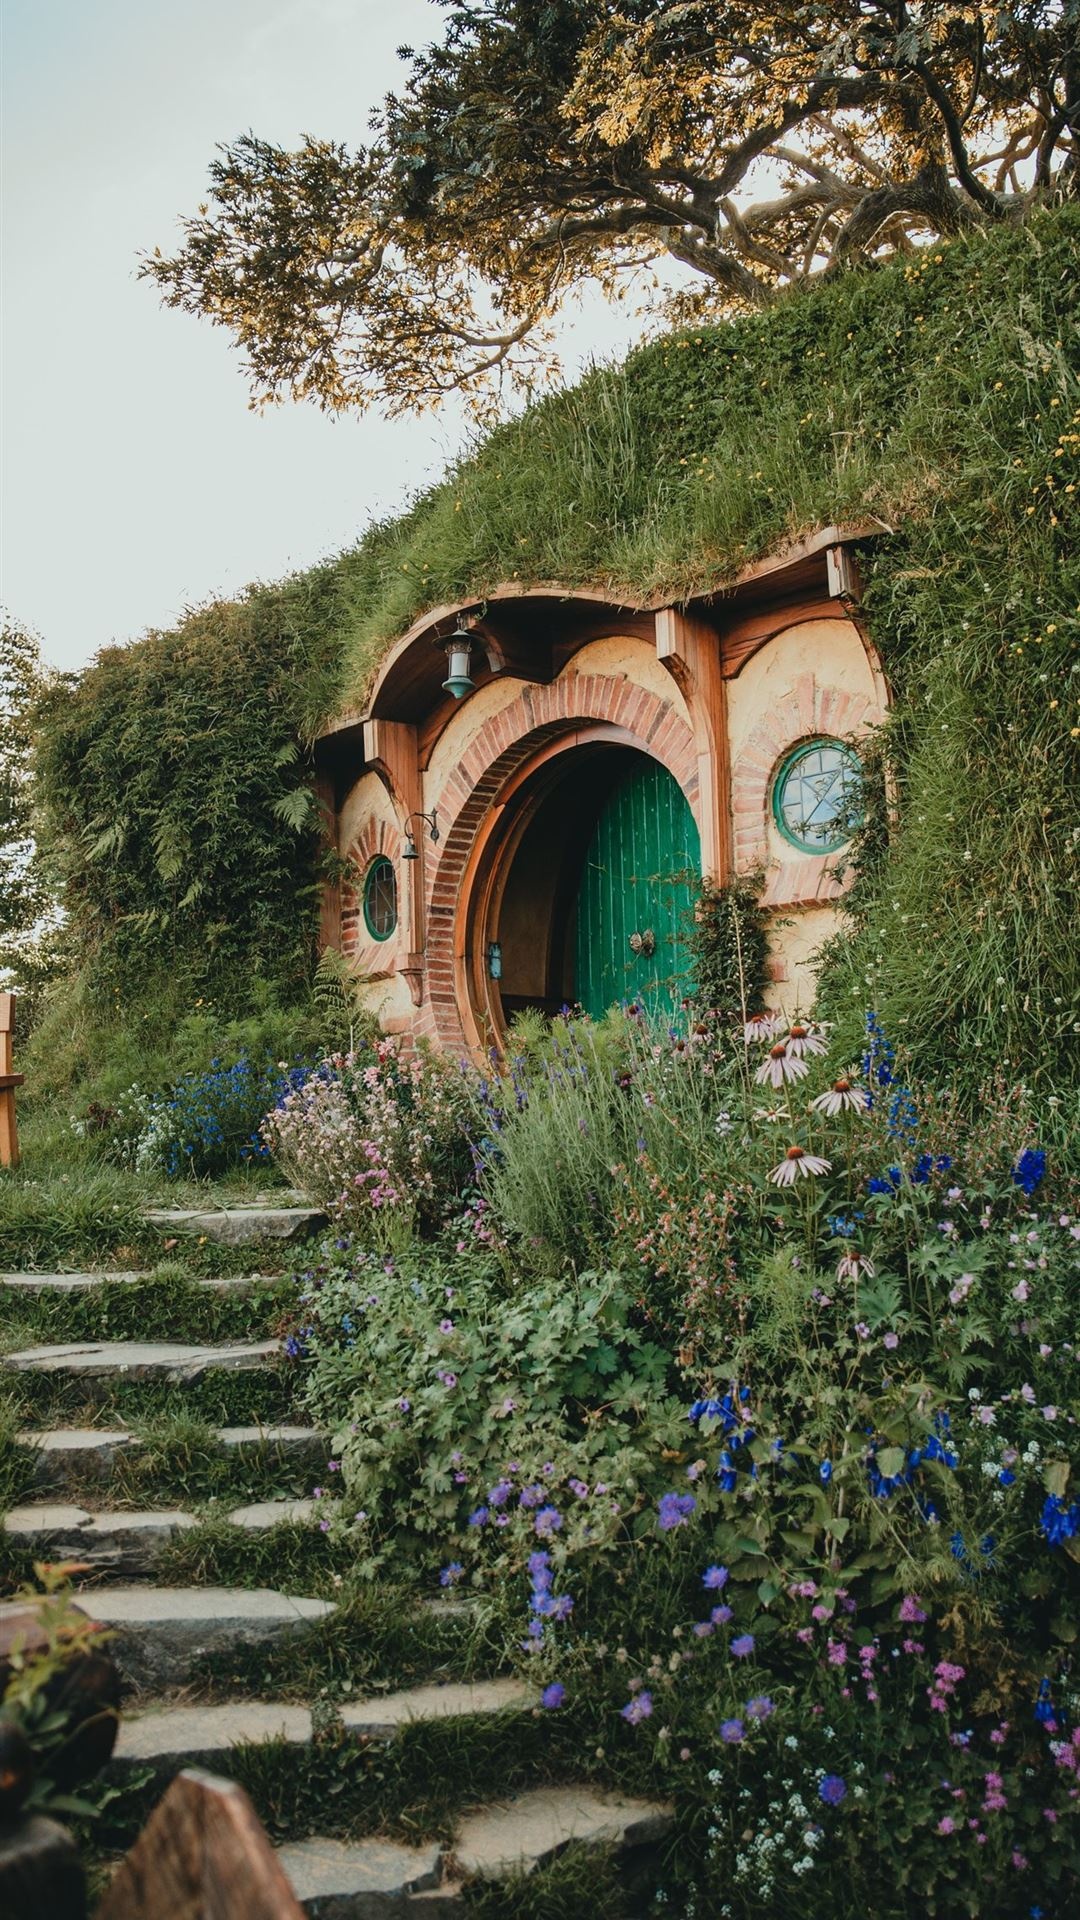 Hobbiton iPhone wallpapers, Free downloads, Captivating backgrounds, Mobile delight, 1080x1920 Full HD Phone